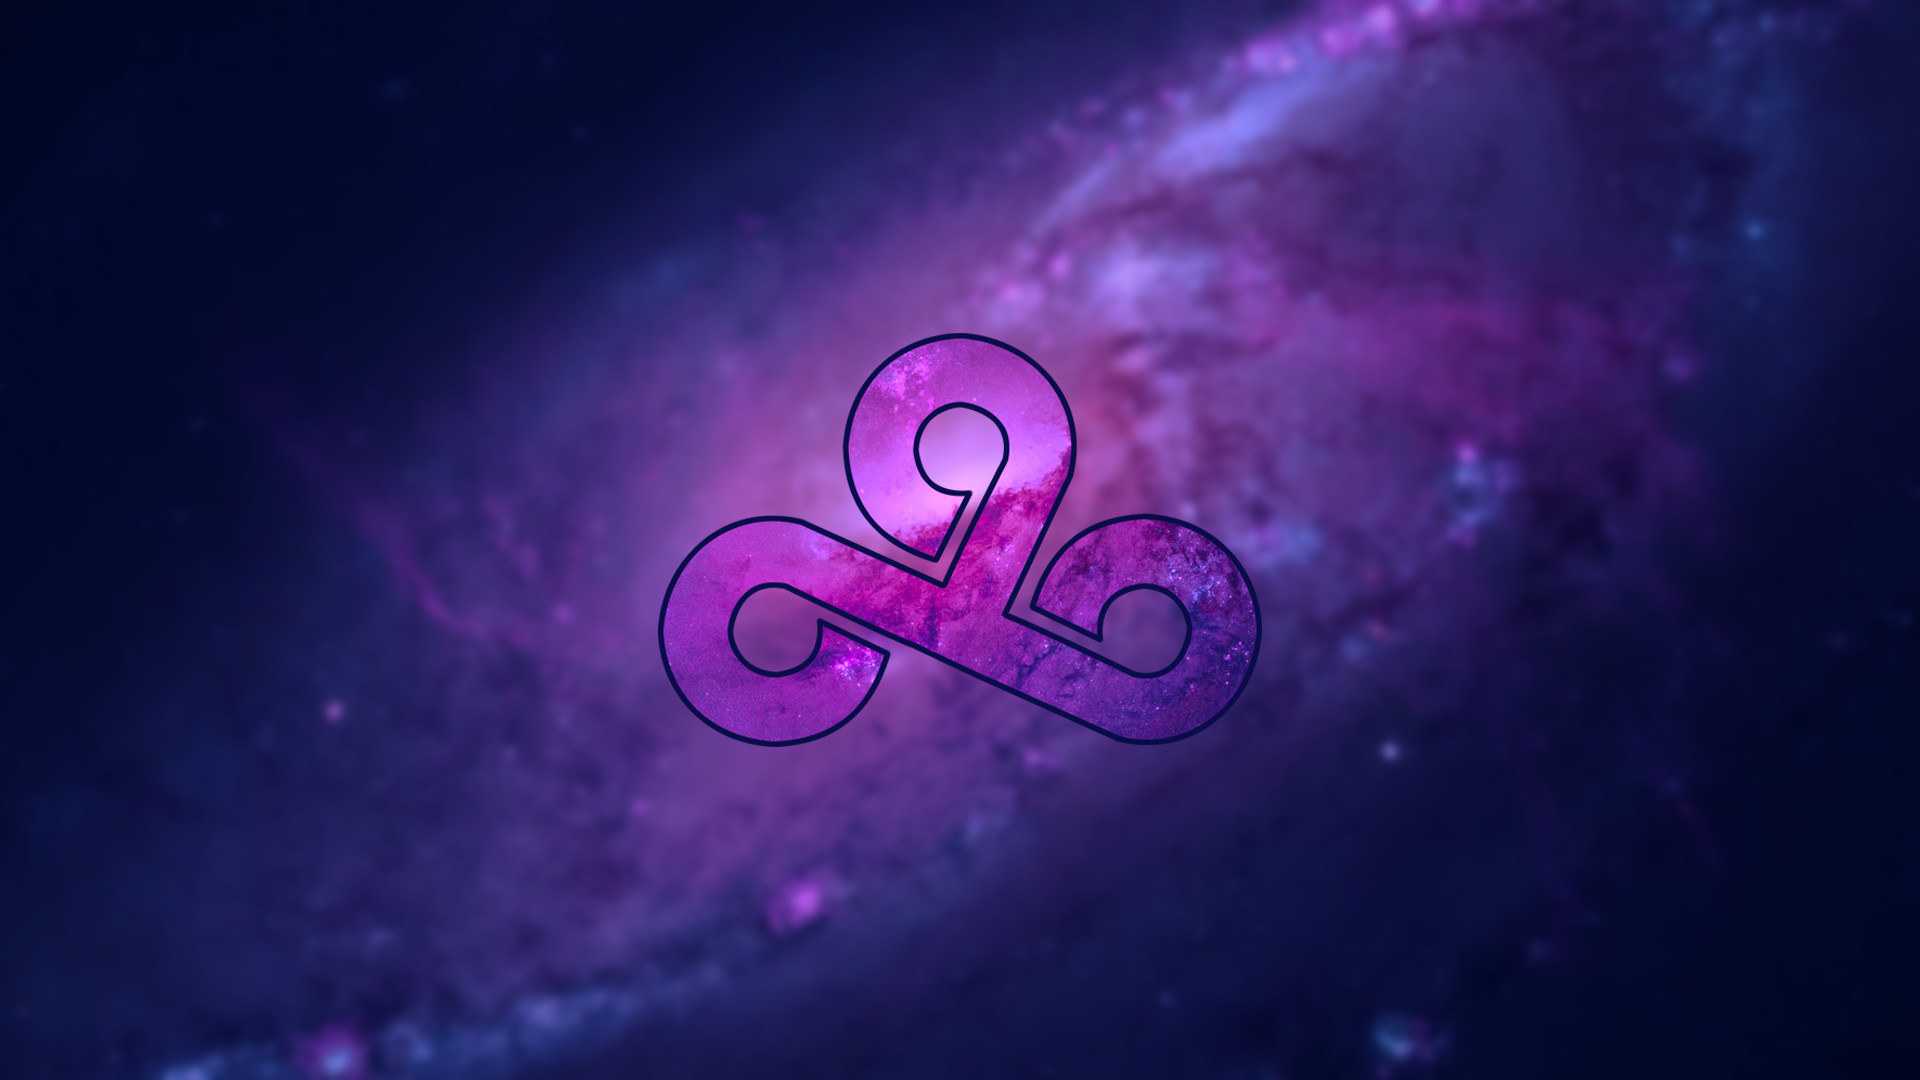 OtherI made a simple Cloud 9 wallpaper